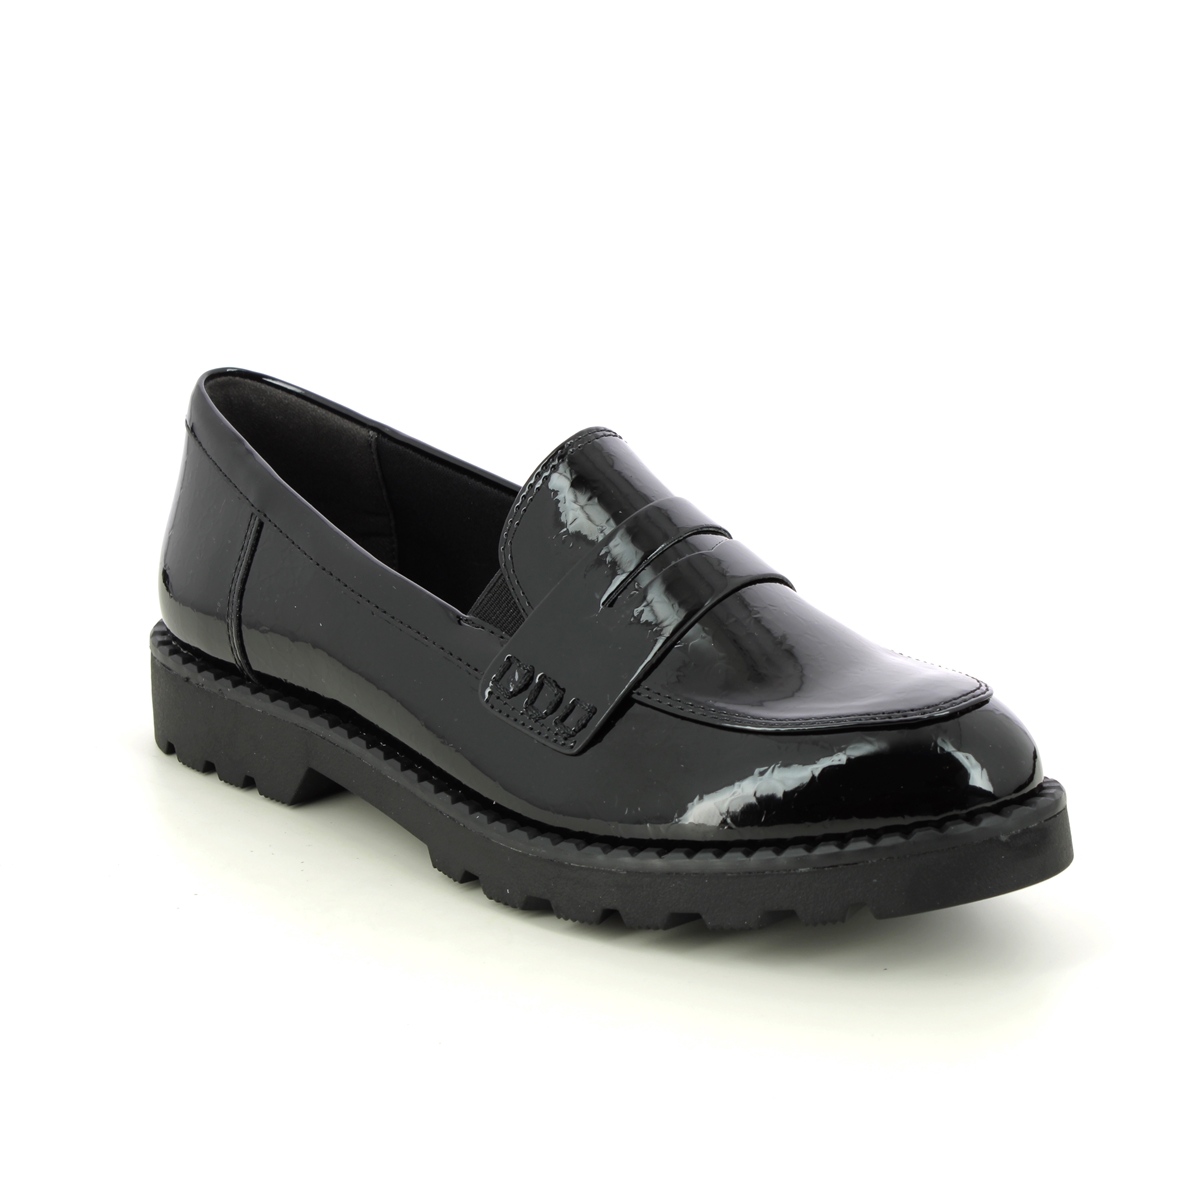 Tamaris Crissy 25 Black Patent Womens Loafers 24312-29-063 In Size 39 In Plain Black Patent